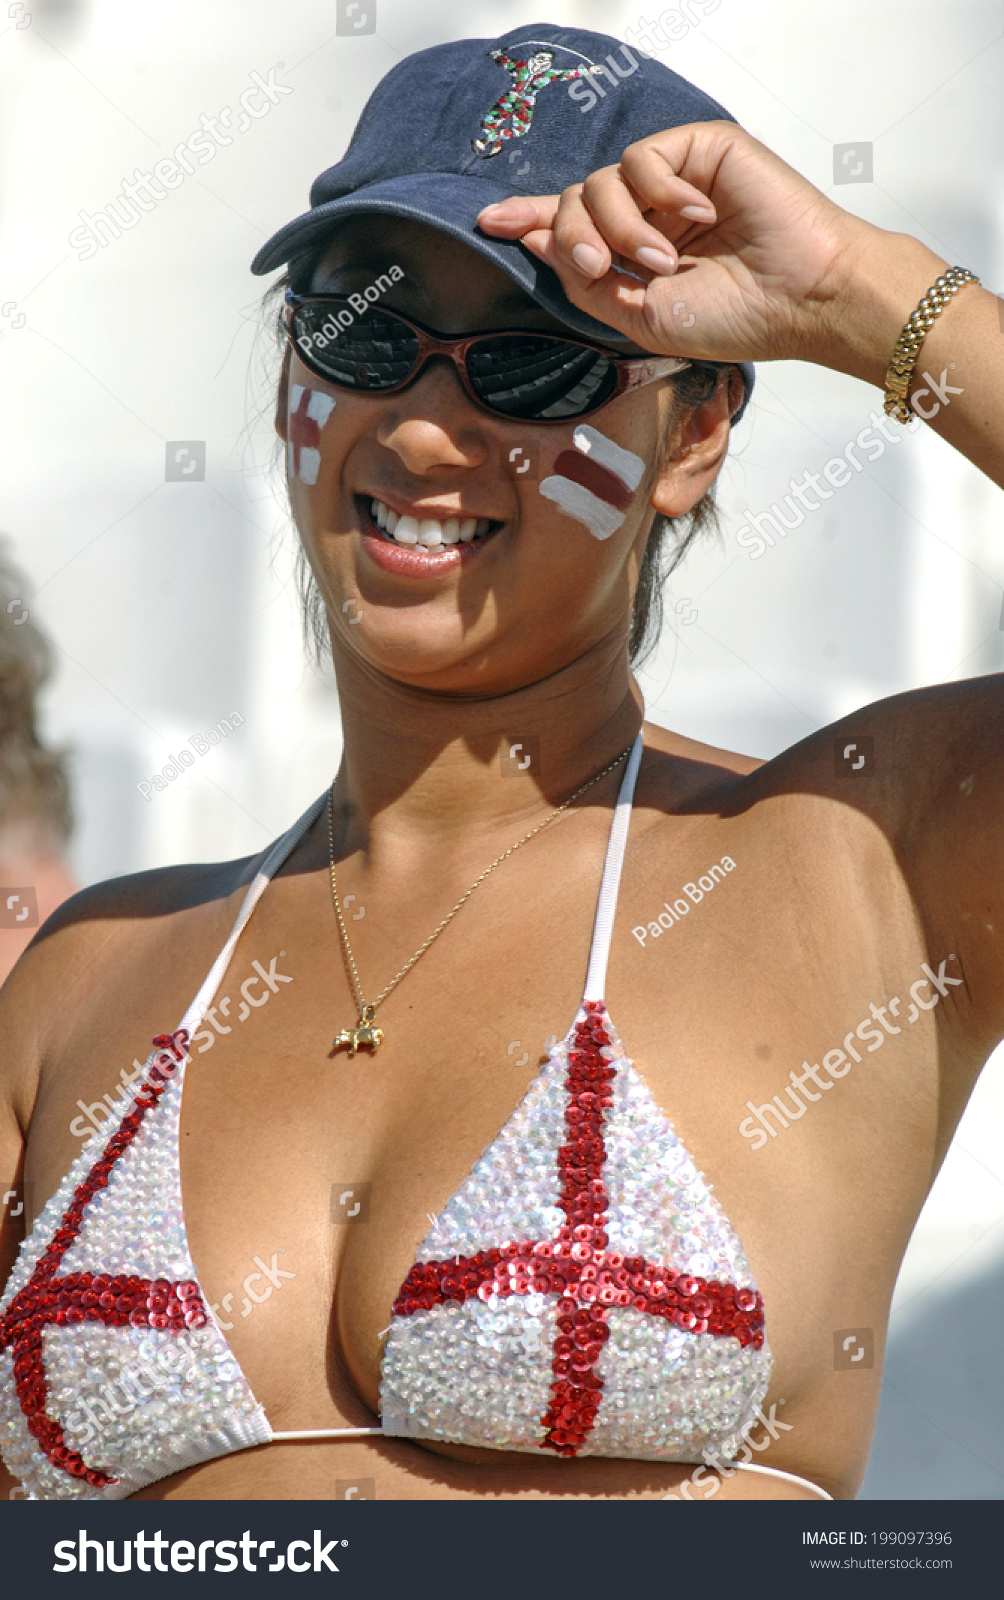 stock-photo-marseille-france-october-english-rugby-fan-girl-wearing-a-bikini-with-national-colors-199097396.jpg